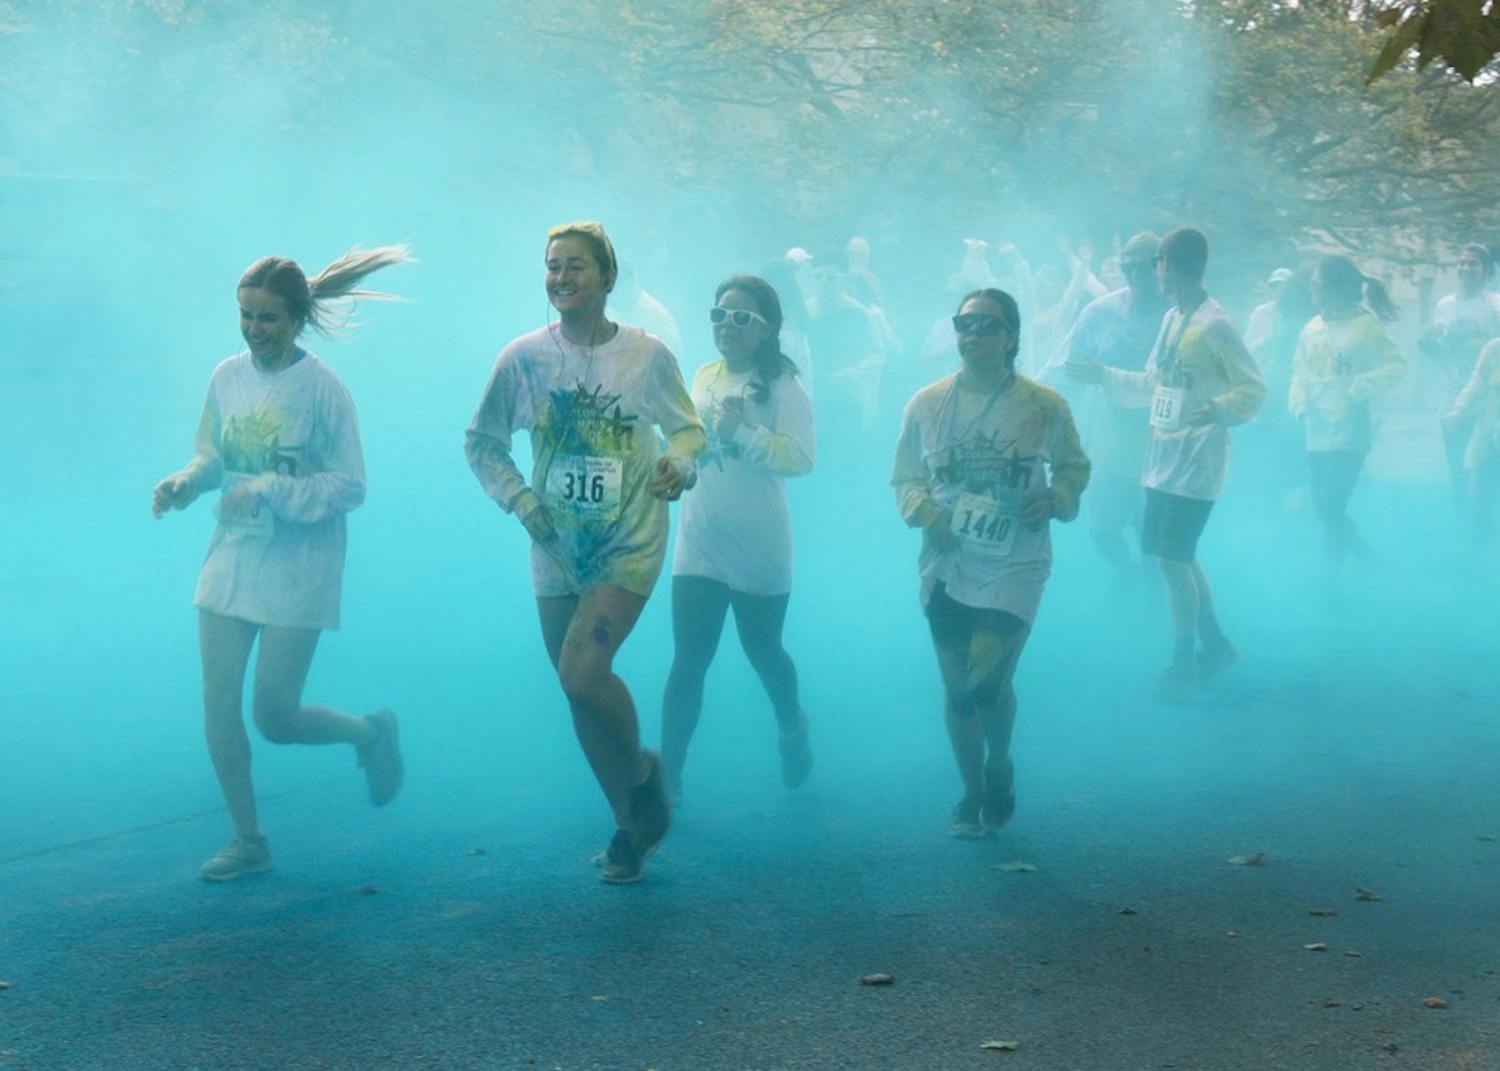 Participants run through blue powder at the last color station of the Jill Behrman Color the Campus 5K Run/Walk on Saturday. This was the 18th running of the JB5K.